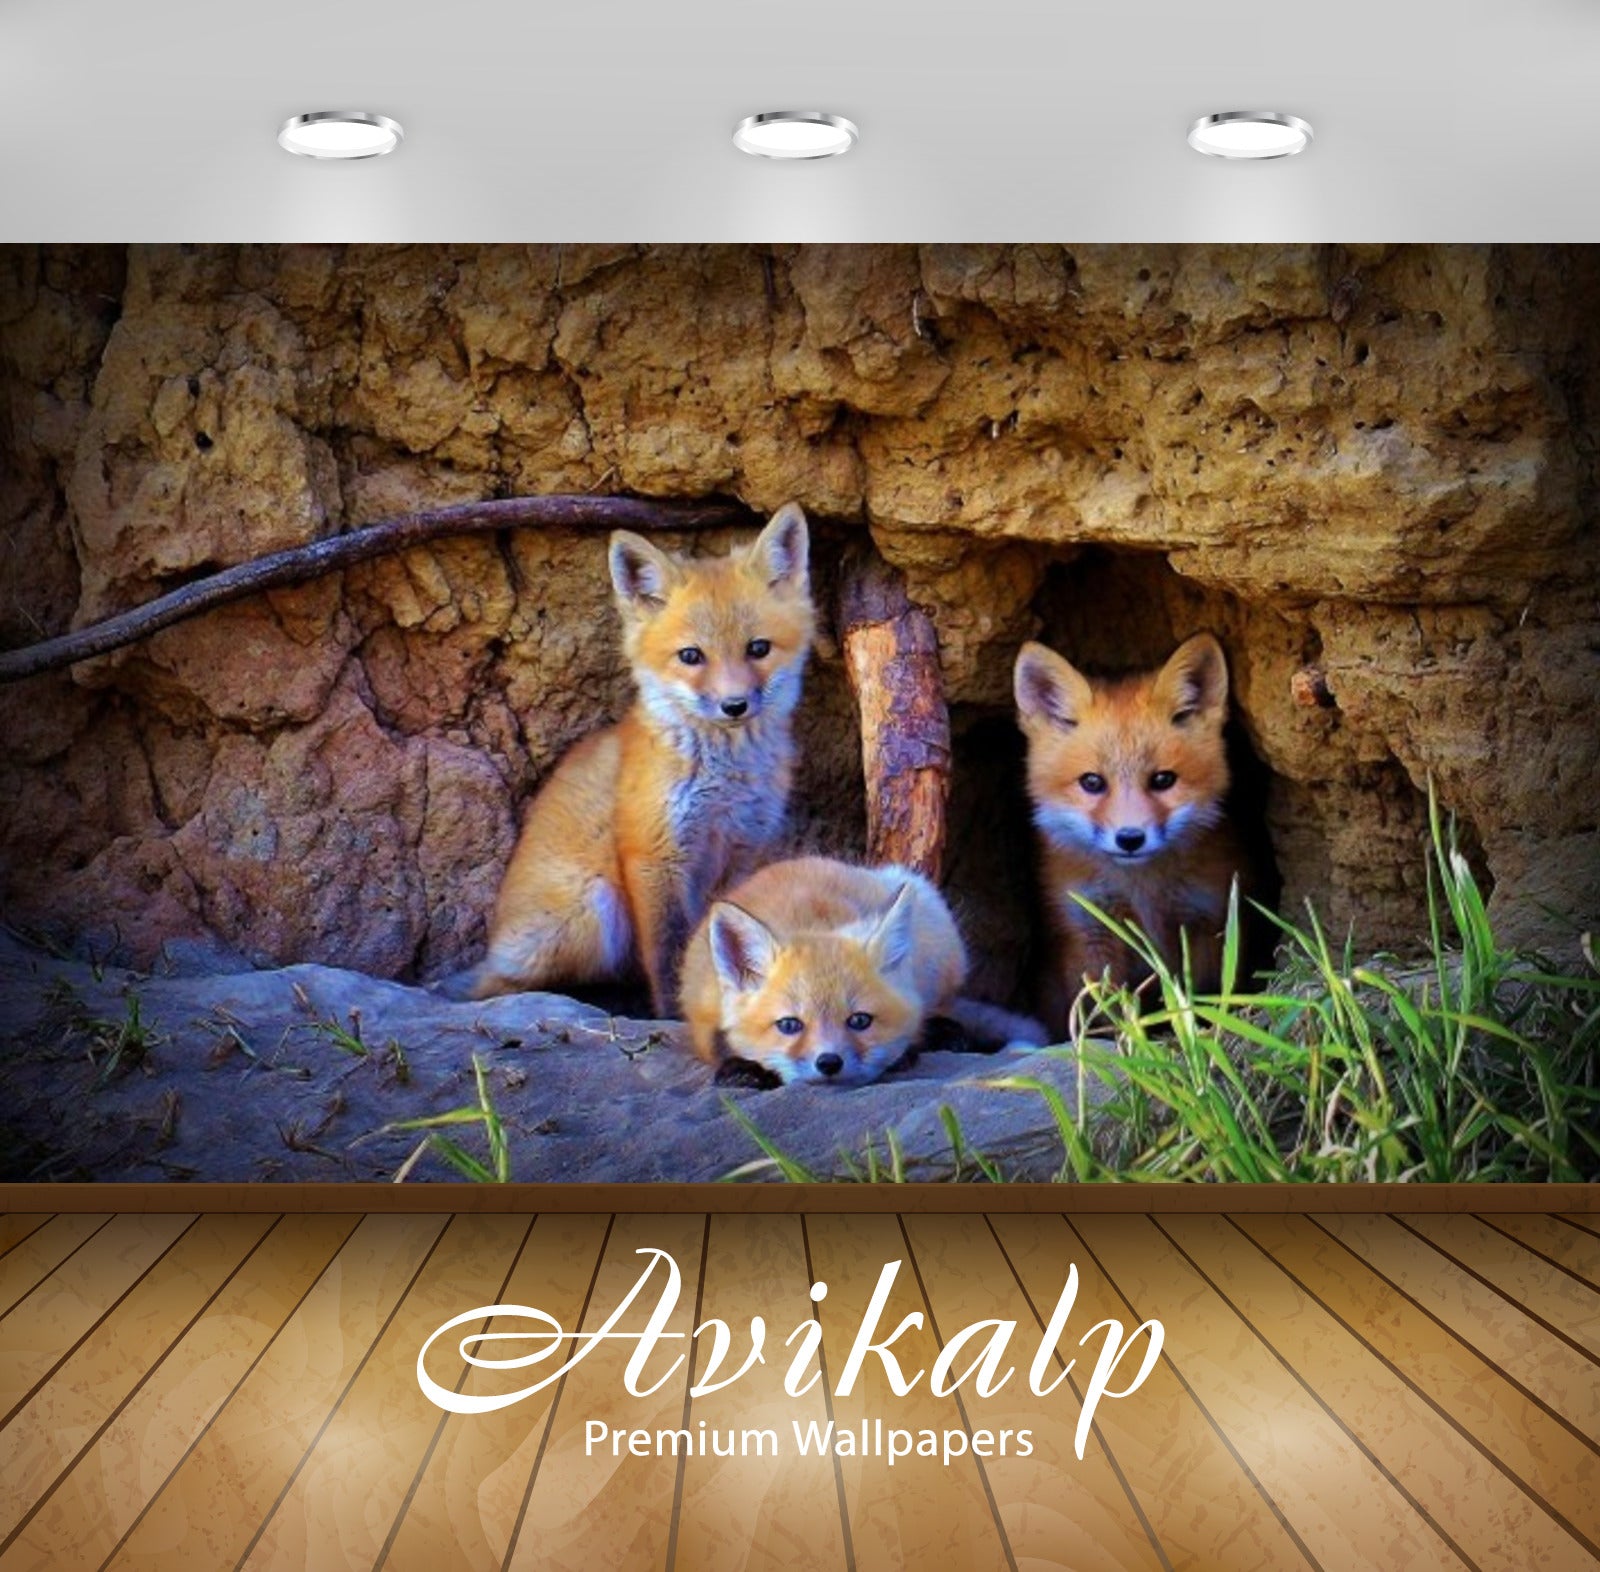 Avikalp Exclusive Awi2639 Fox Family Three Cubs Full HD Wallpapers for Living room, Hall, Kids Room,